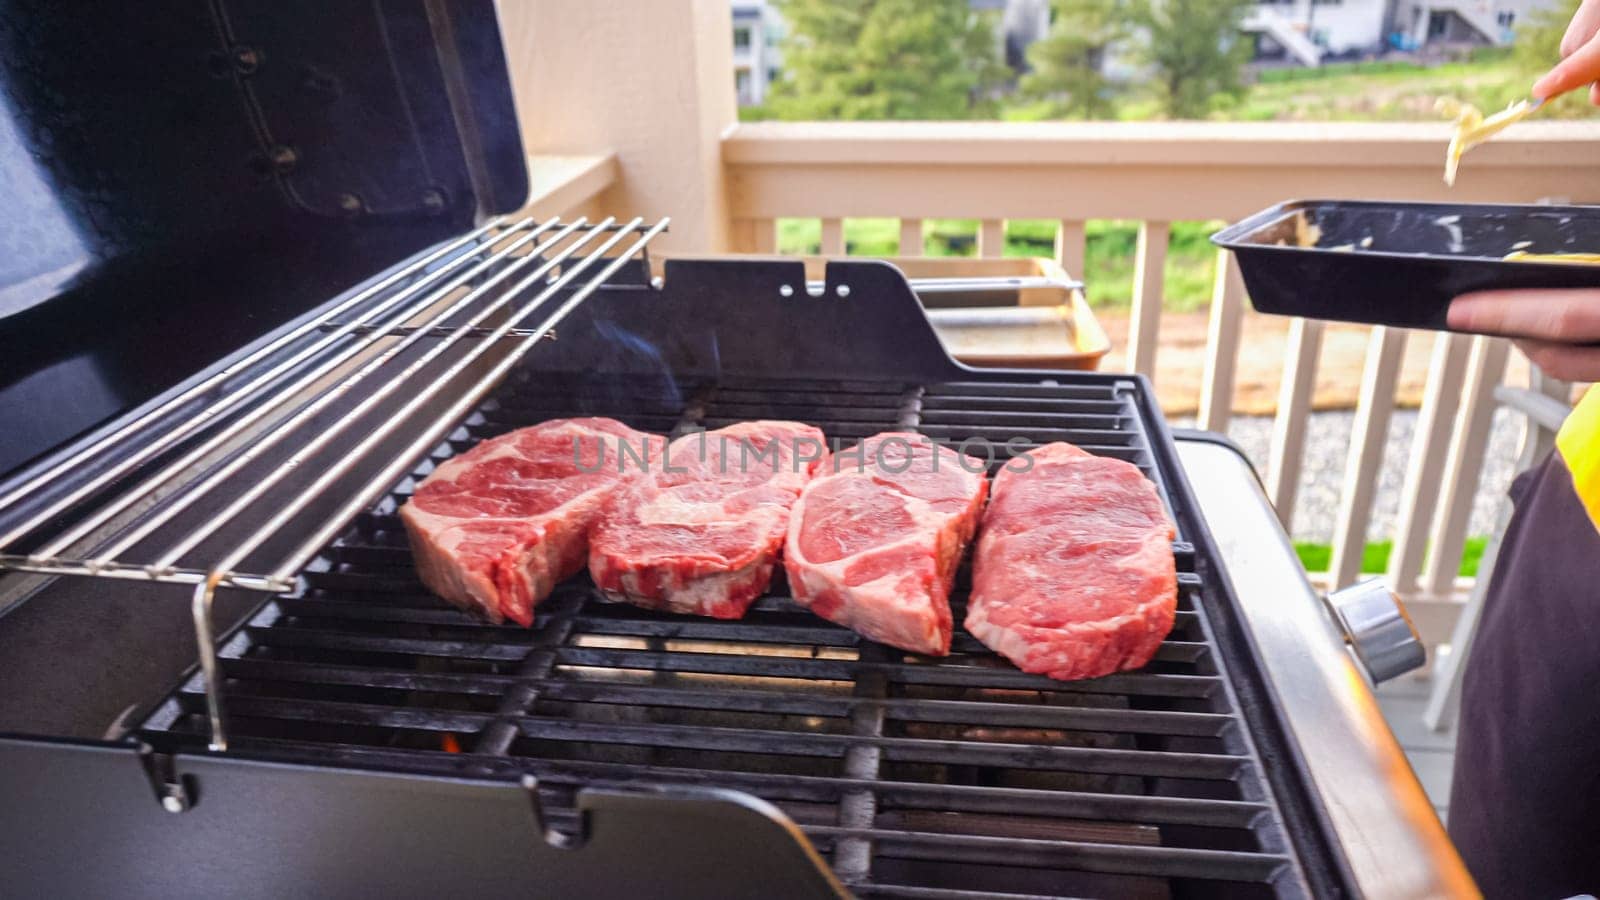 The outdoor two-burner gas grill is put to good use, sizzling with the sound and aroma of ribeye steaks and onion rings being perfectly cooked.